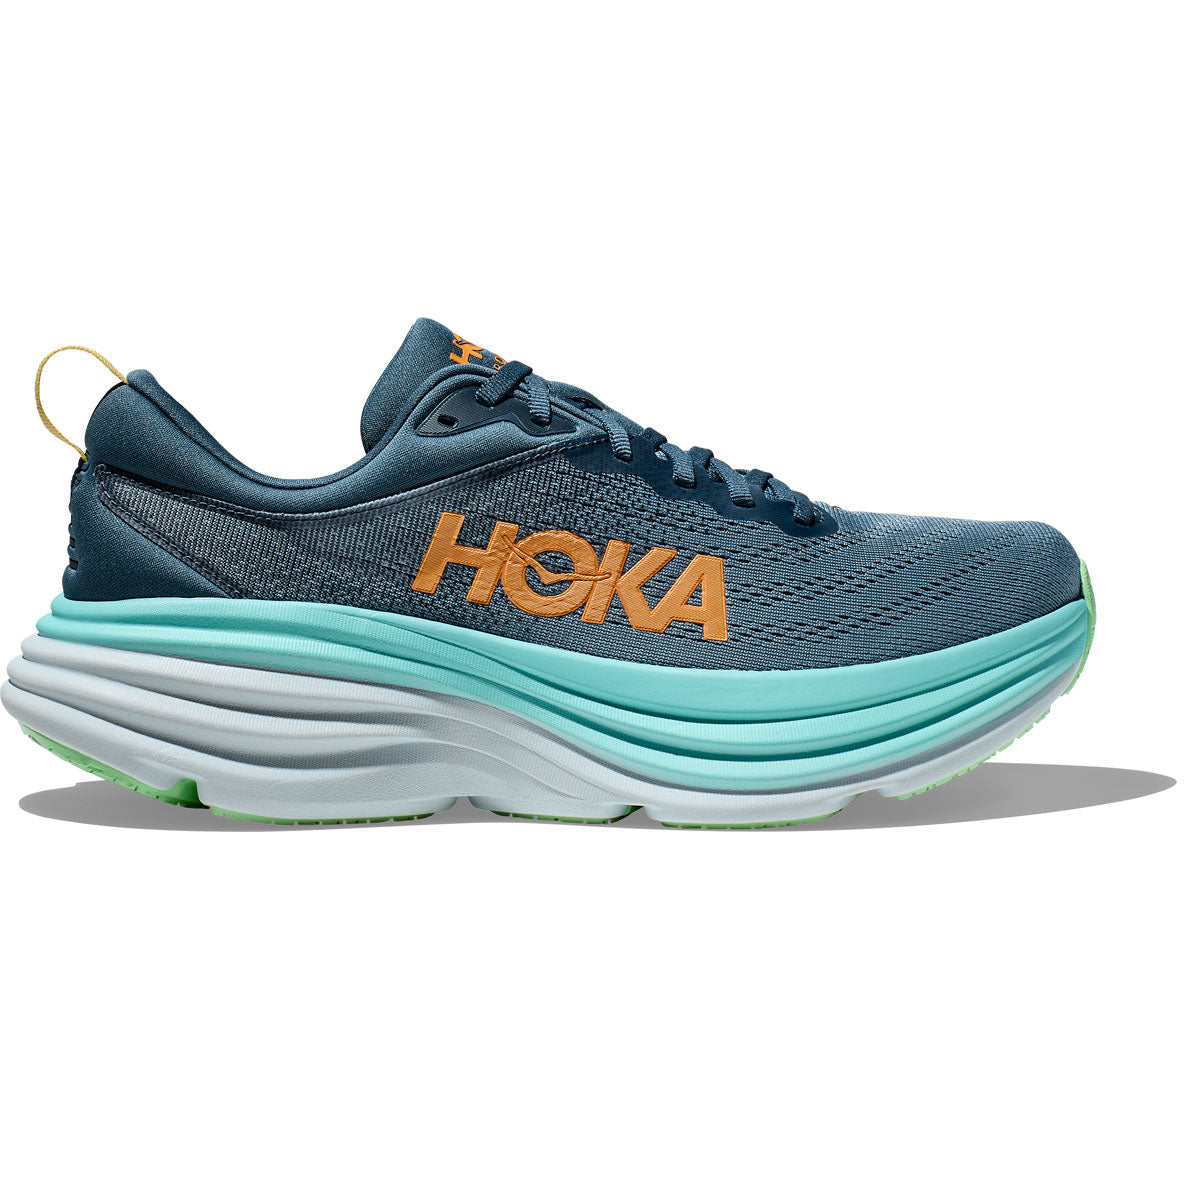 Hoka One One Bondi 8 Wide Fit Running Shoes - Mens - Real Teal/Shadow